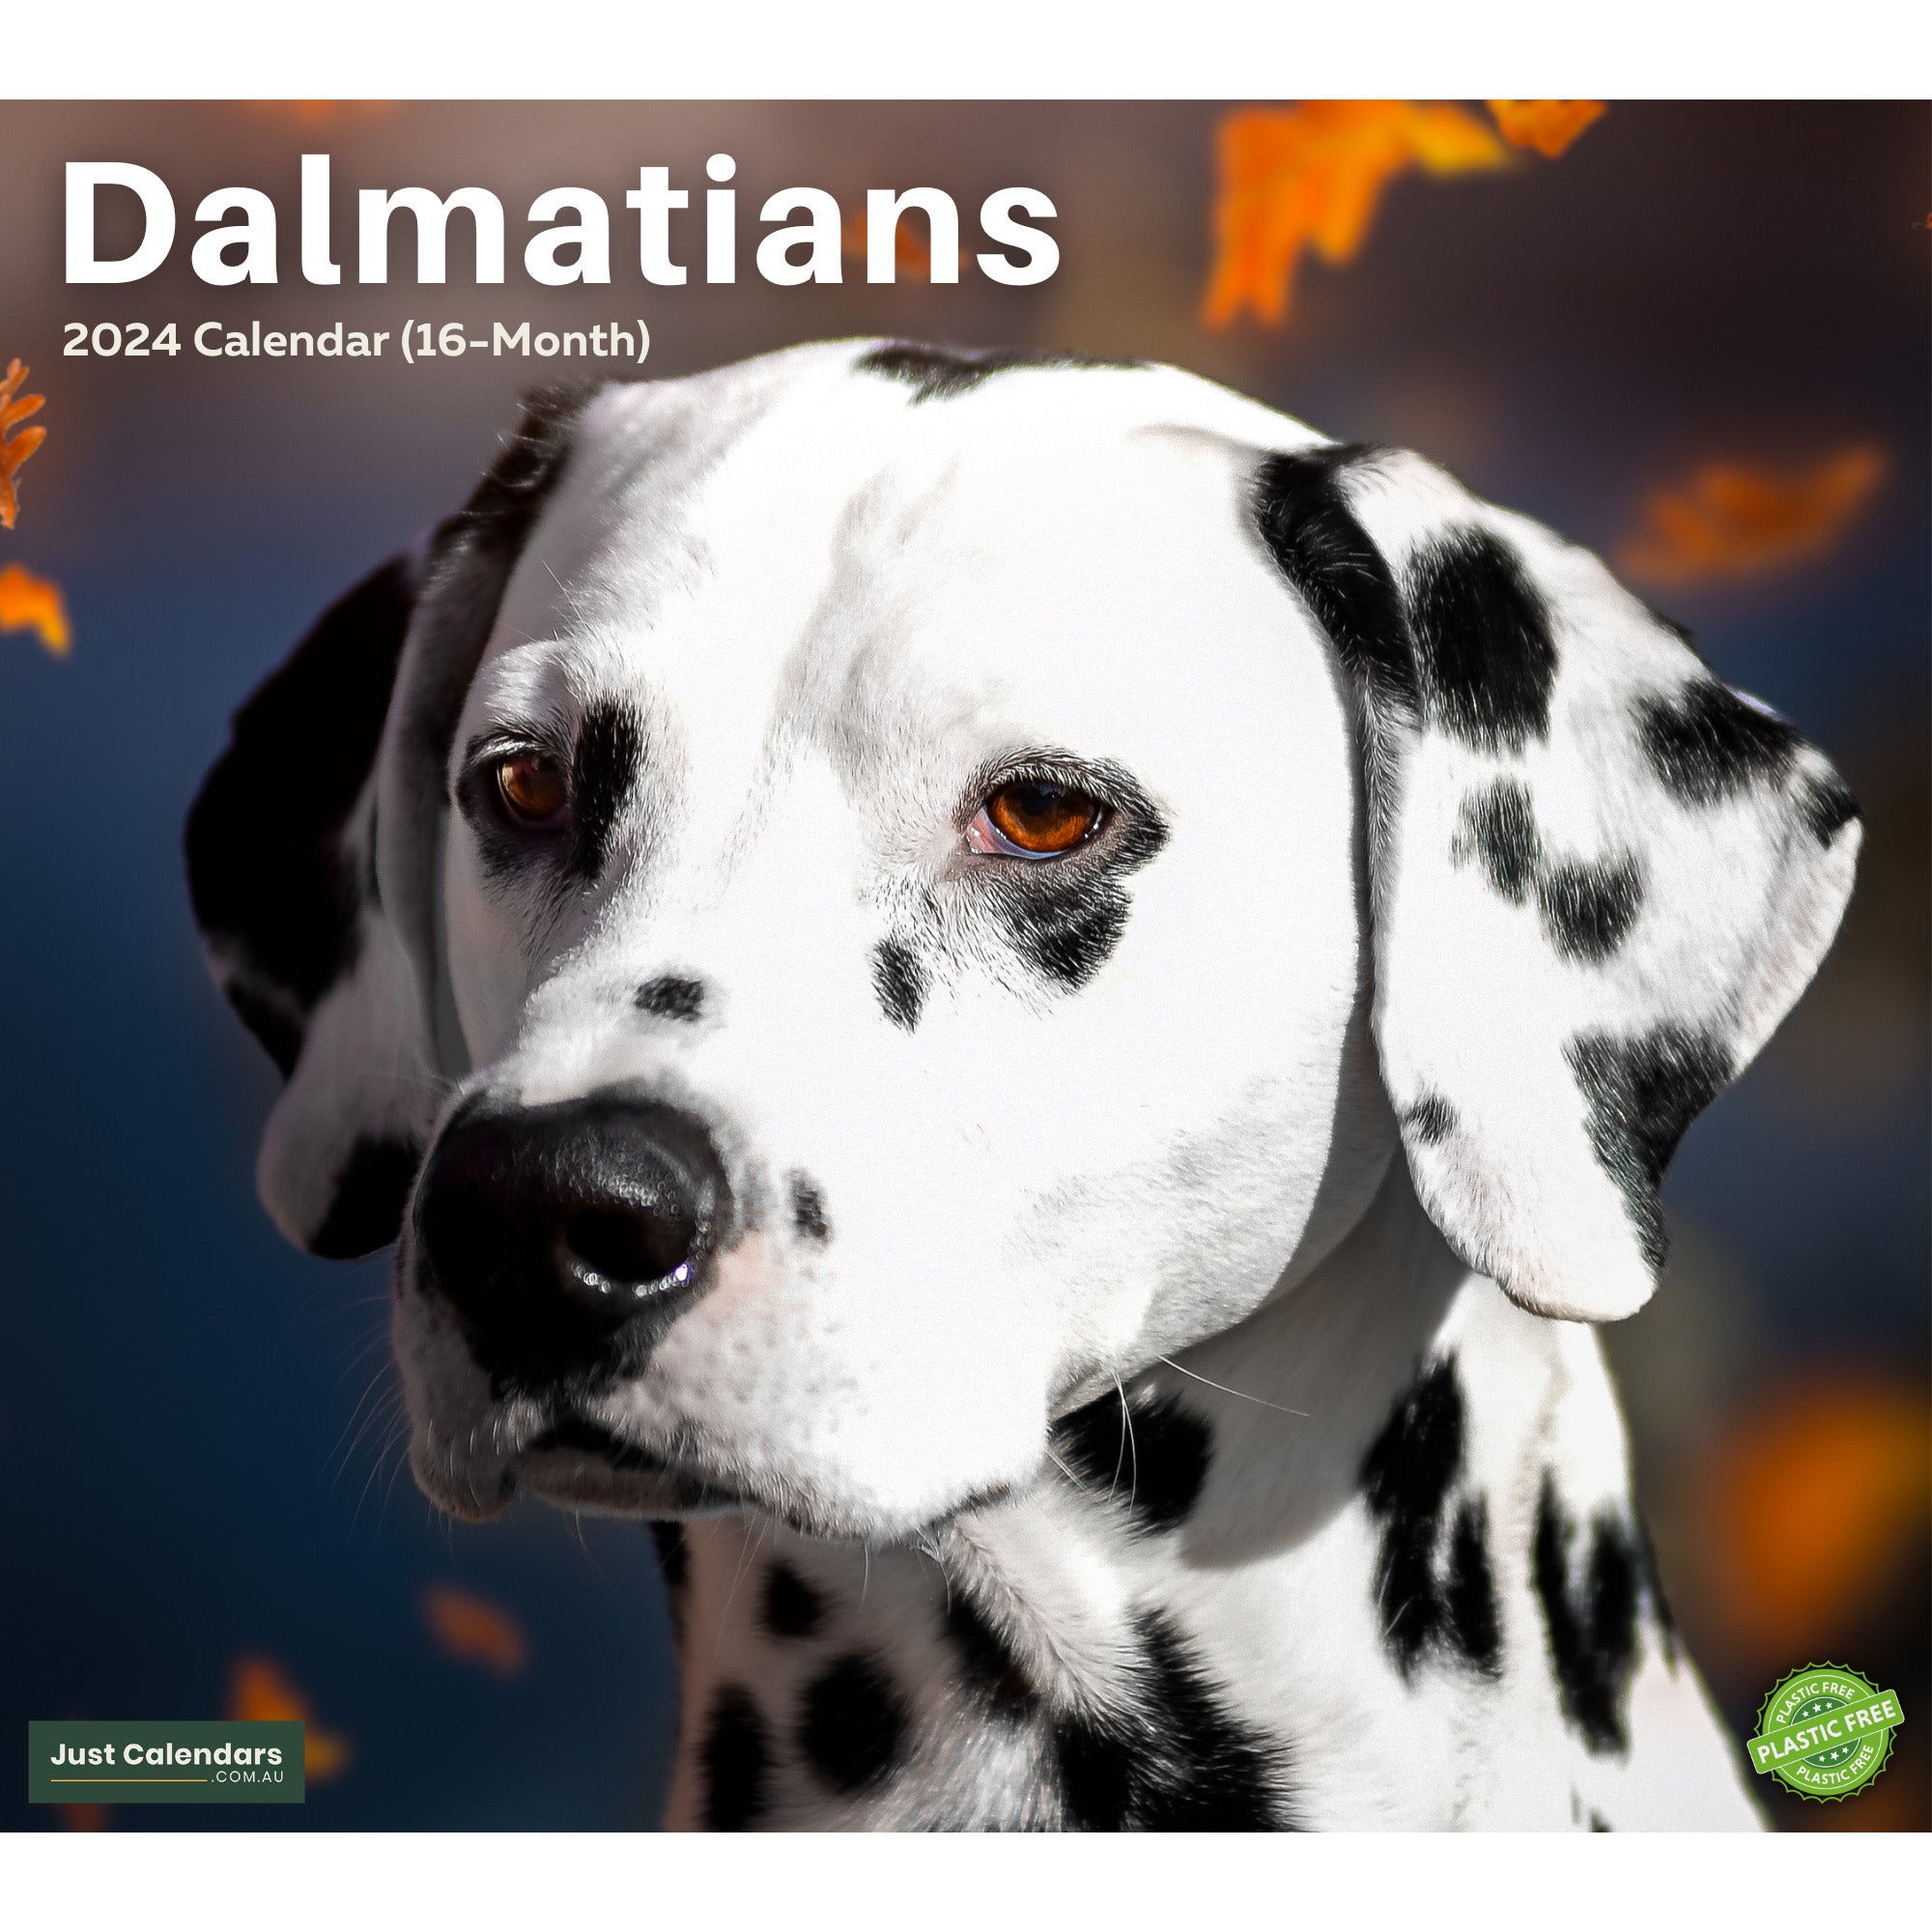 2024 Dalmatians Dogs & Puppies - Deluxe Wall Calendar by Just Calendars - 16 Month - Plastic Free